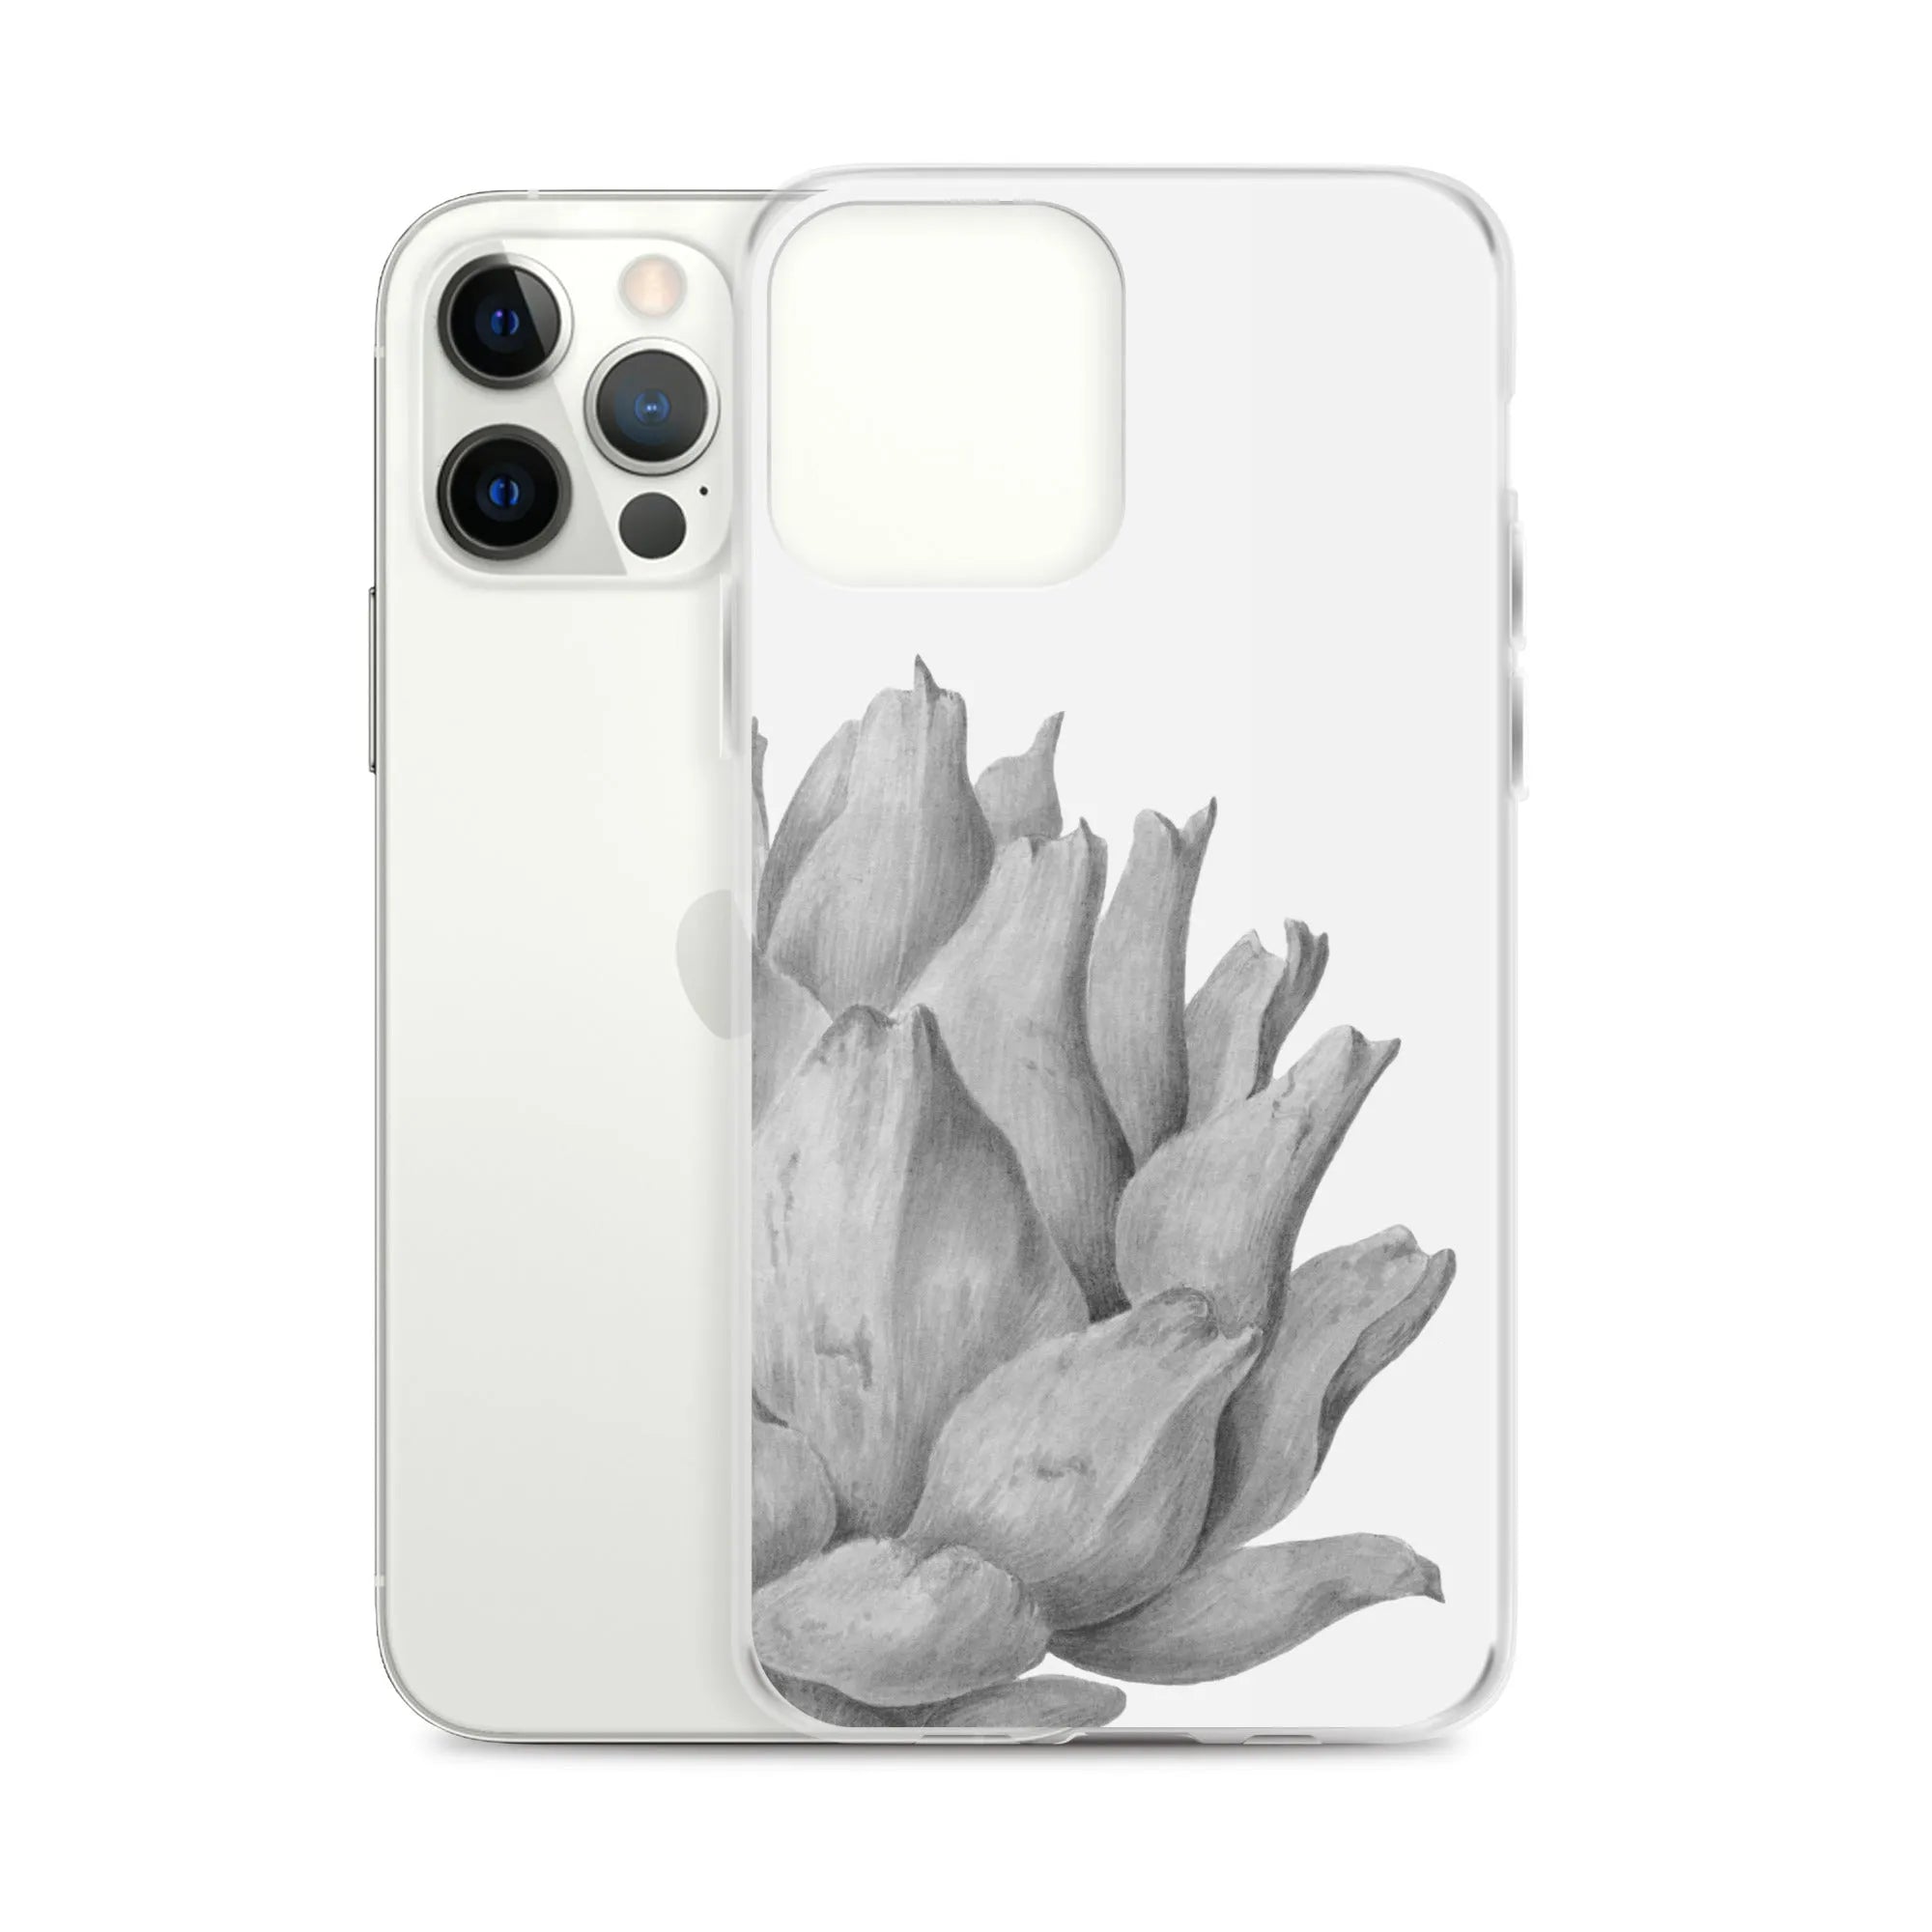 Heartichoke Botanical Art Iphone Case - Black And White - Iphone 12 Pro Max - Mobile Phone Cases - Aesthetic Art